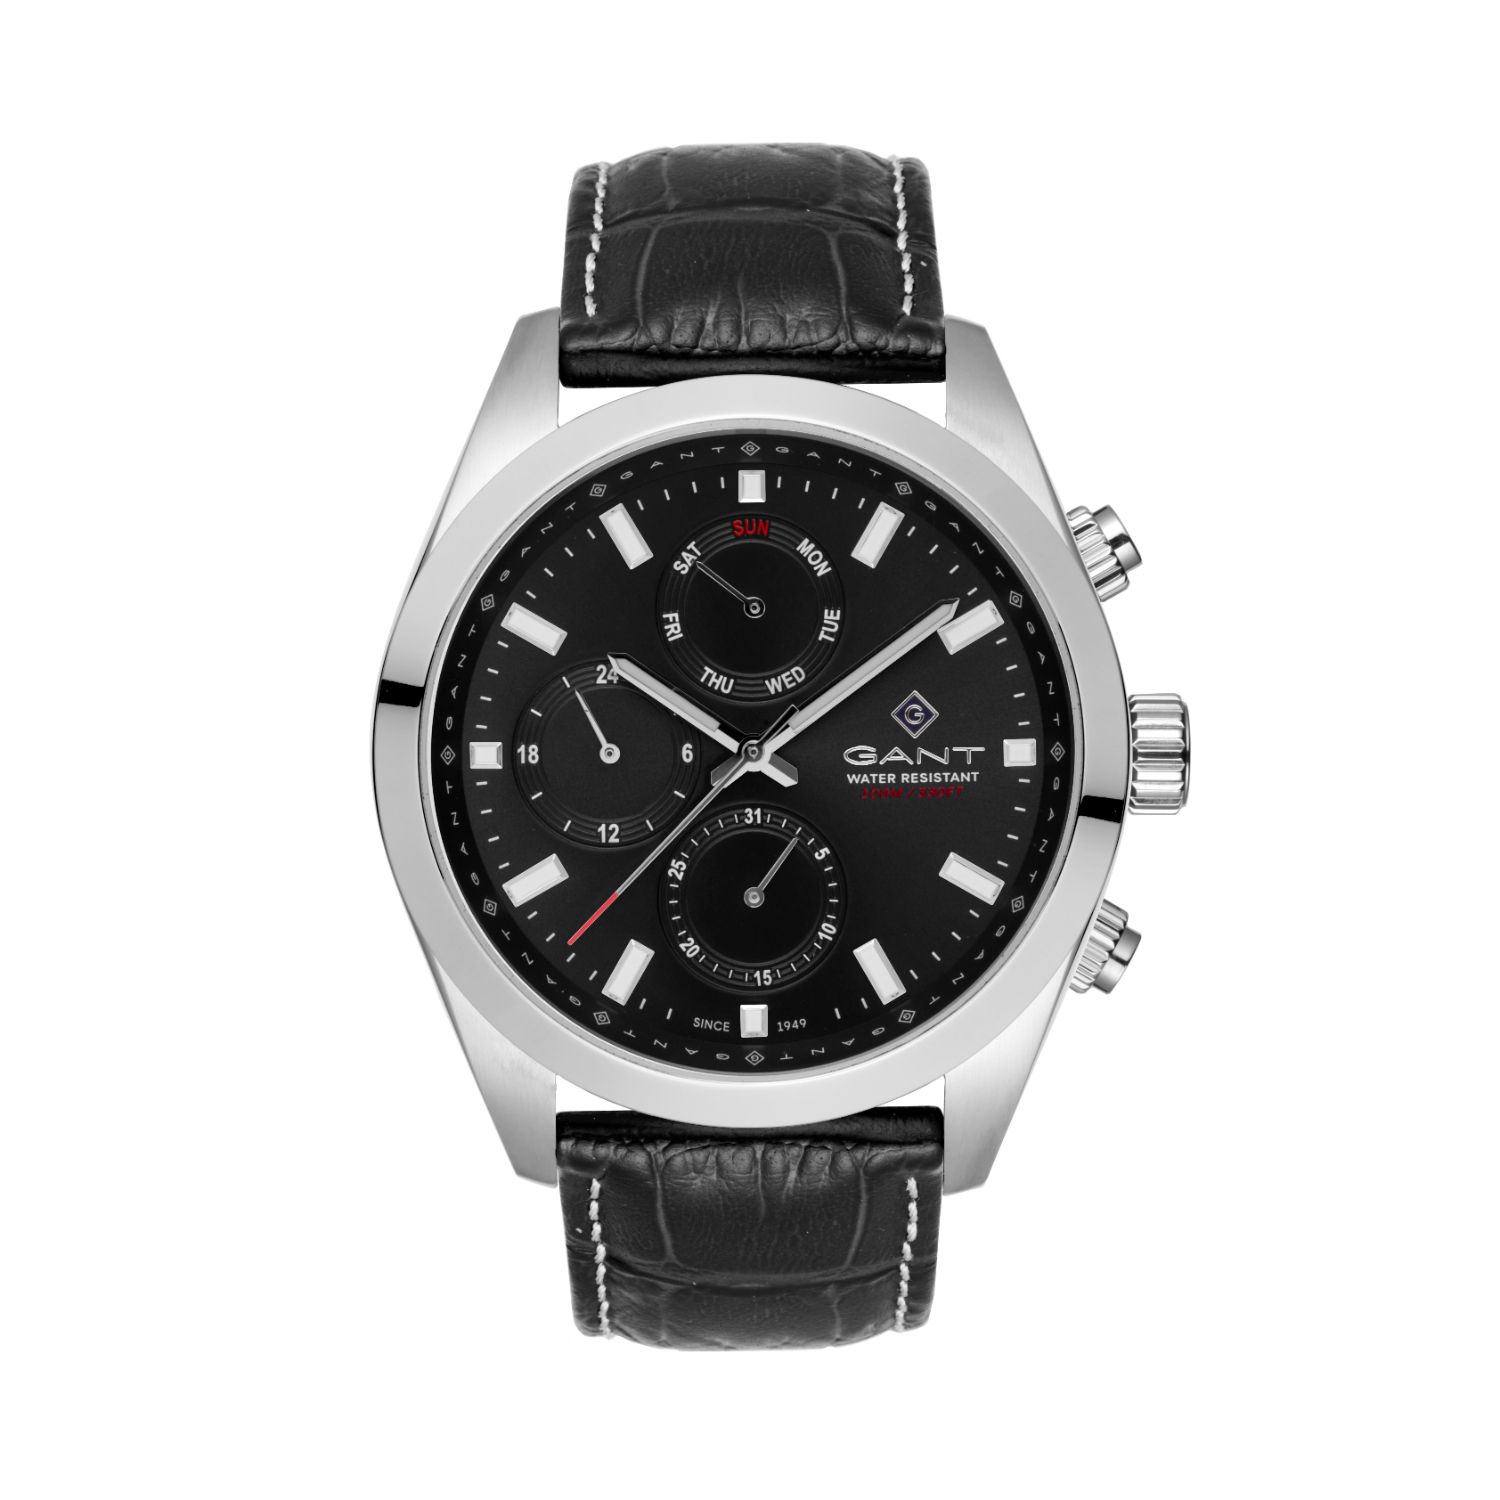 Mens GANT stainless steel watch with black dial and leather strap.